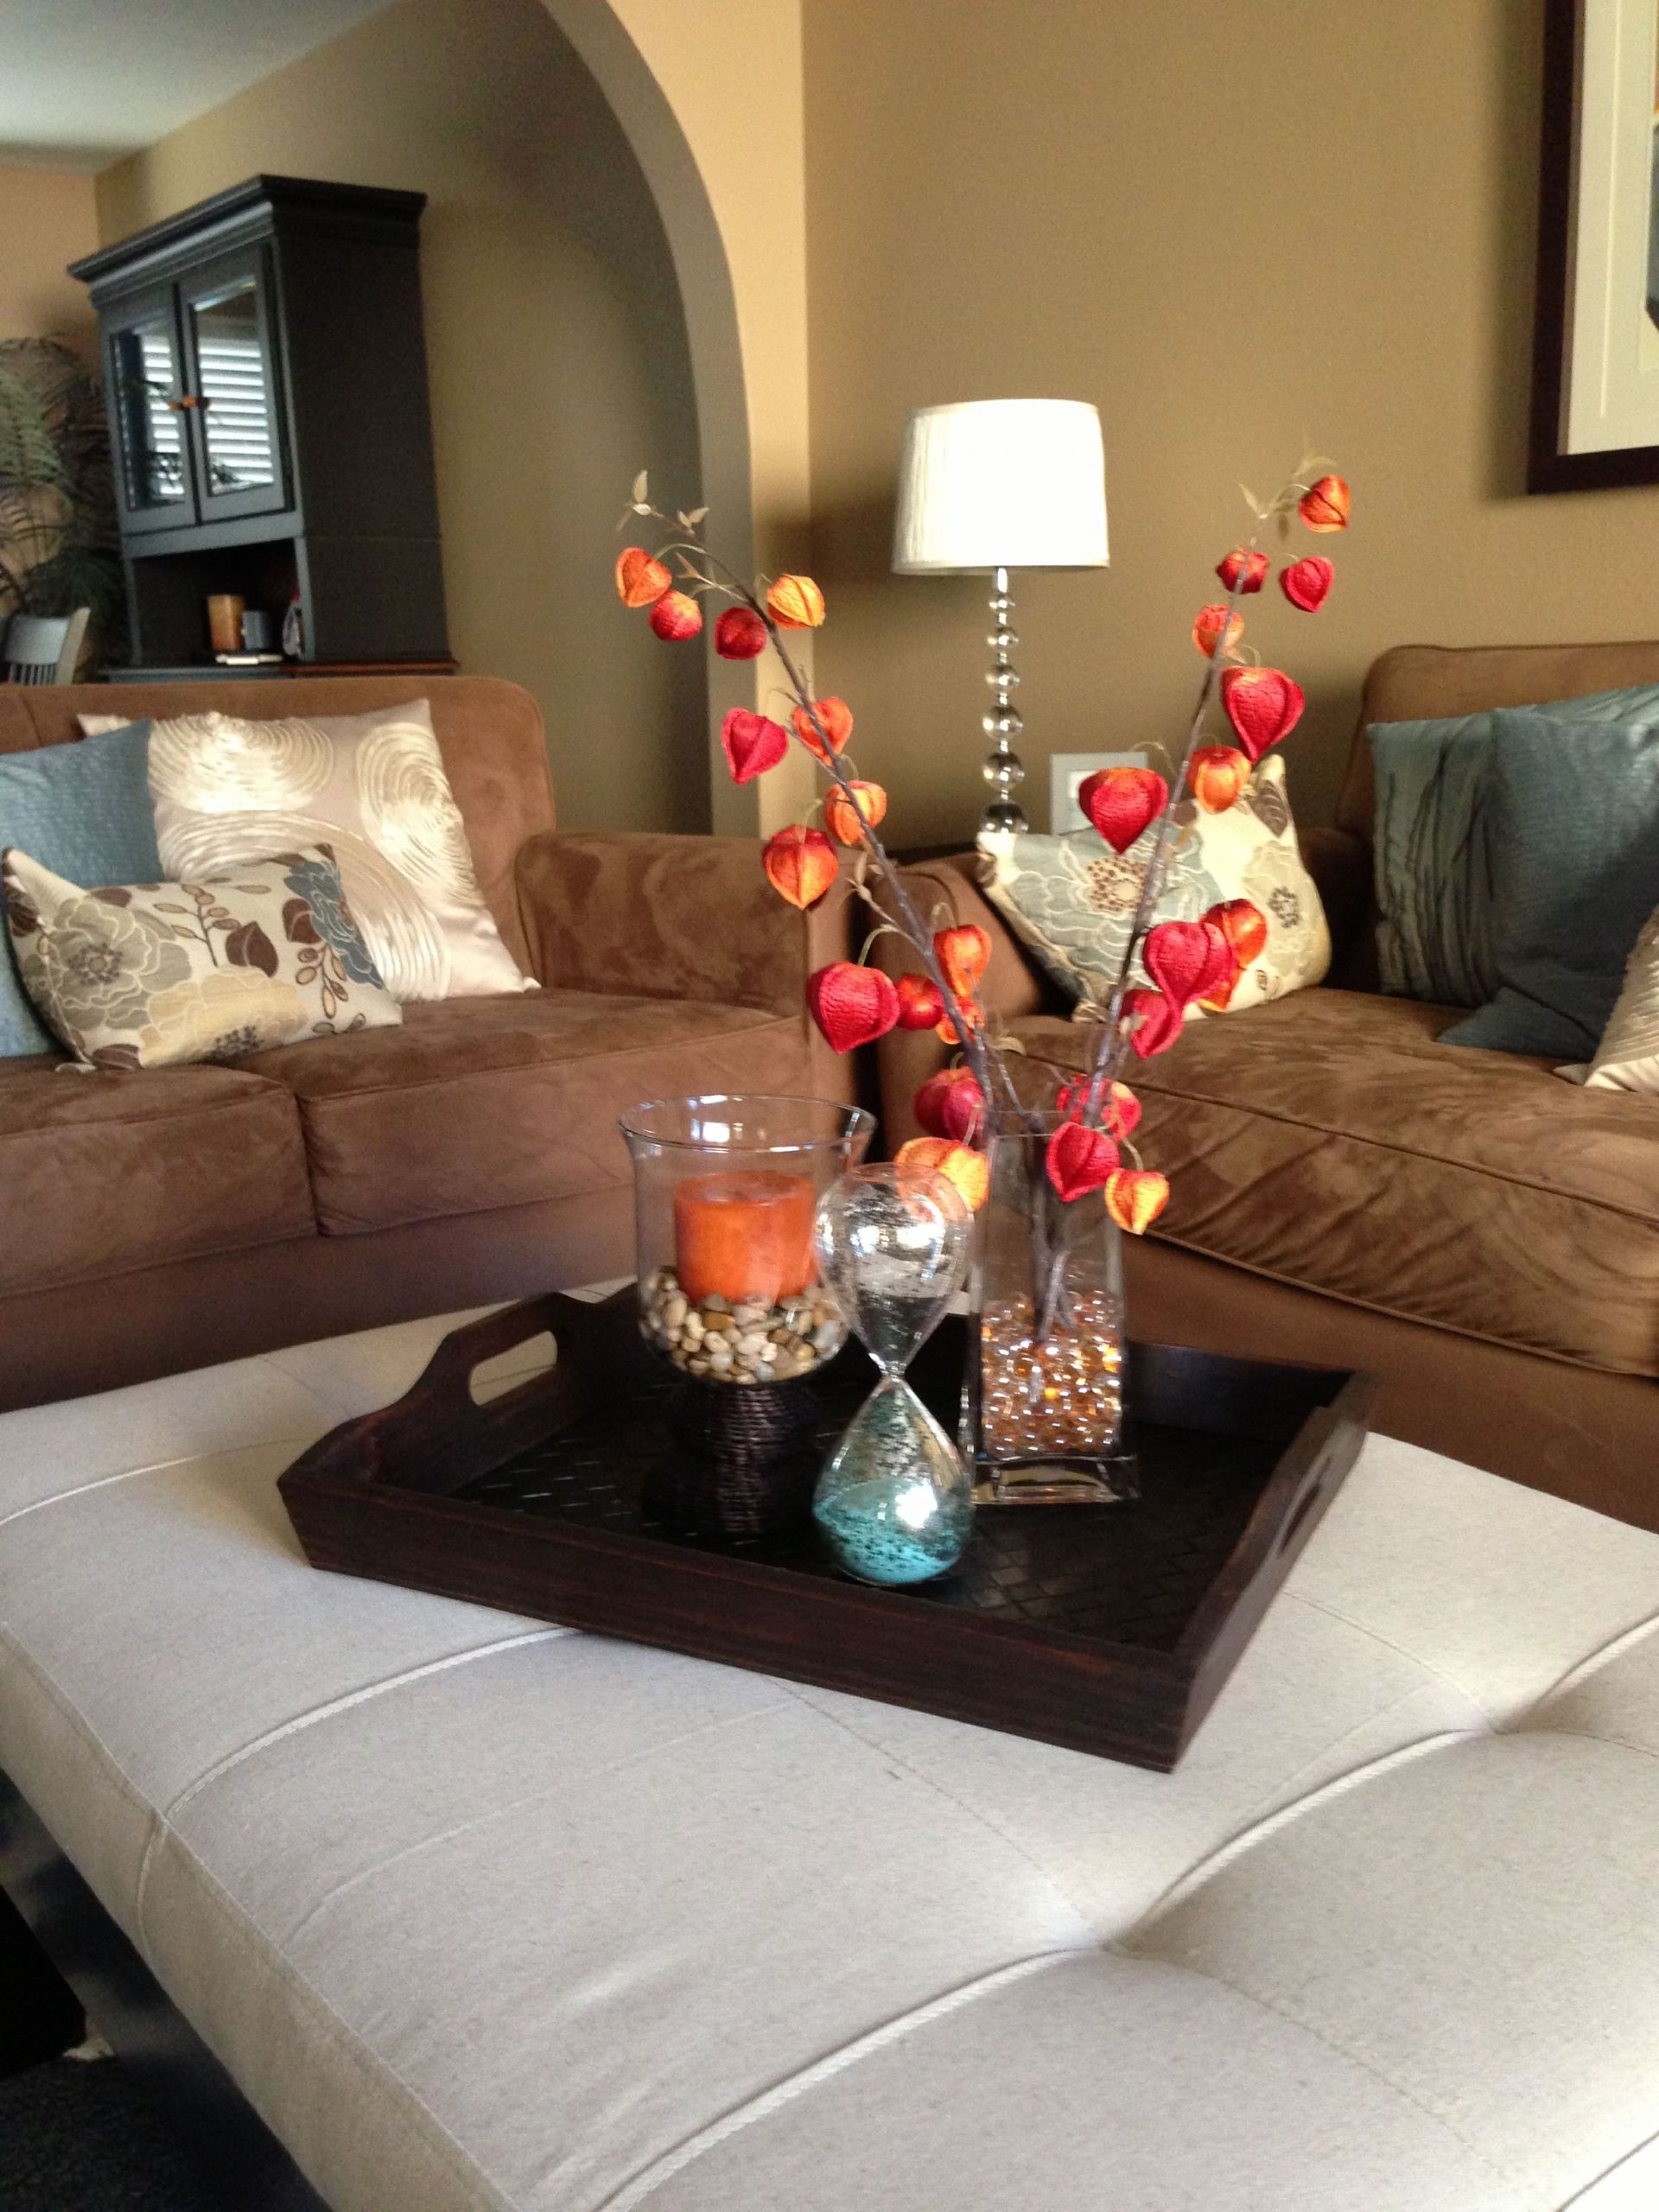 Living Room Centerpieces Ideas
 Centerpieces from Pier 1 Imports